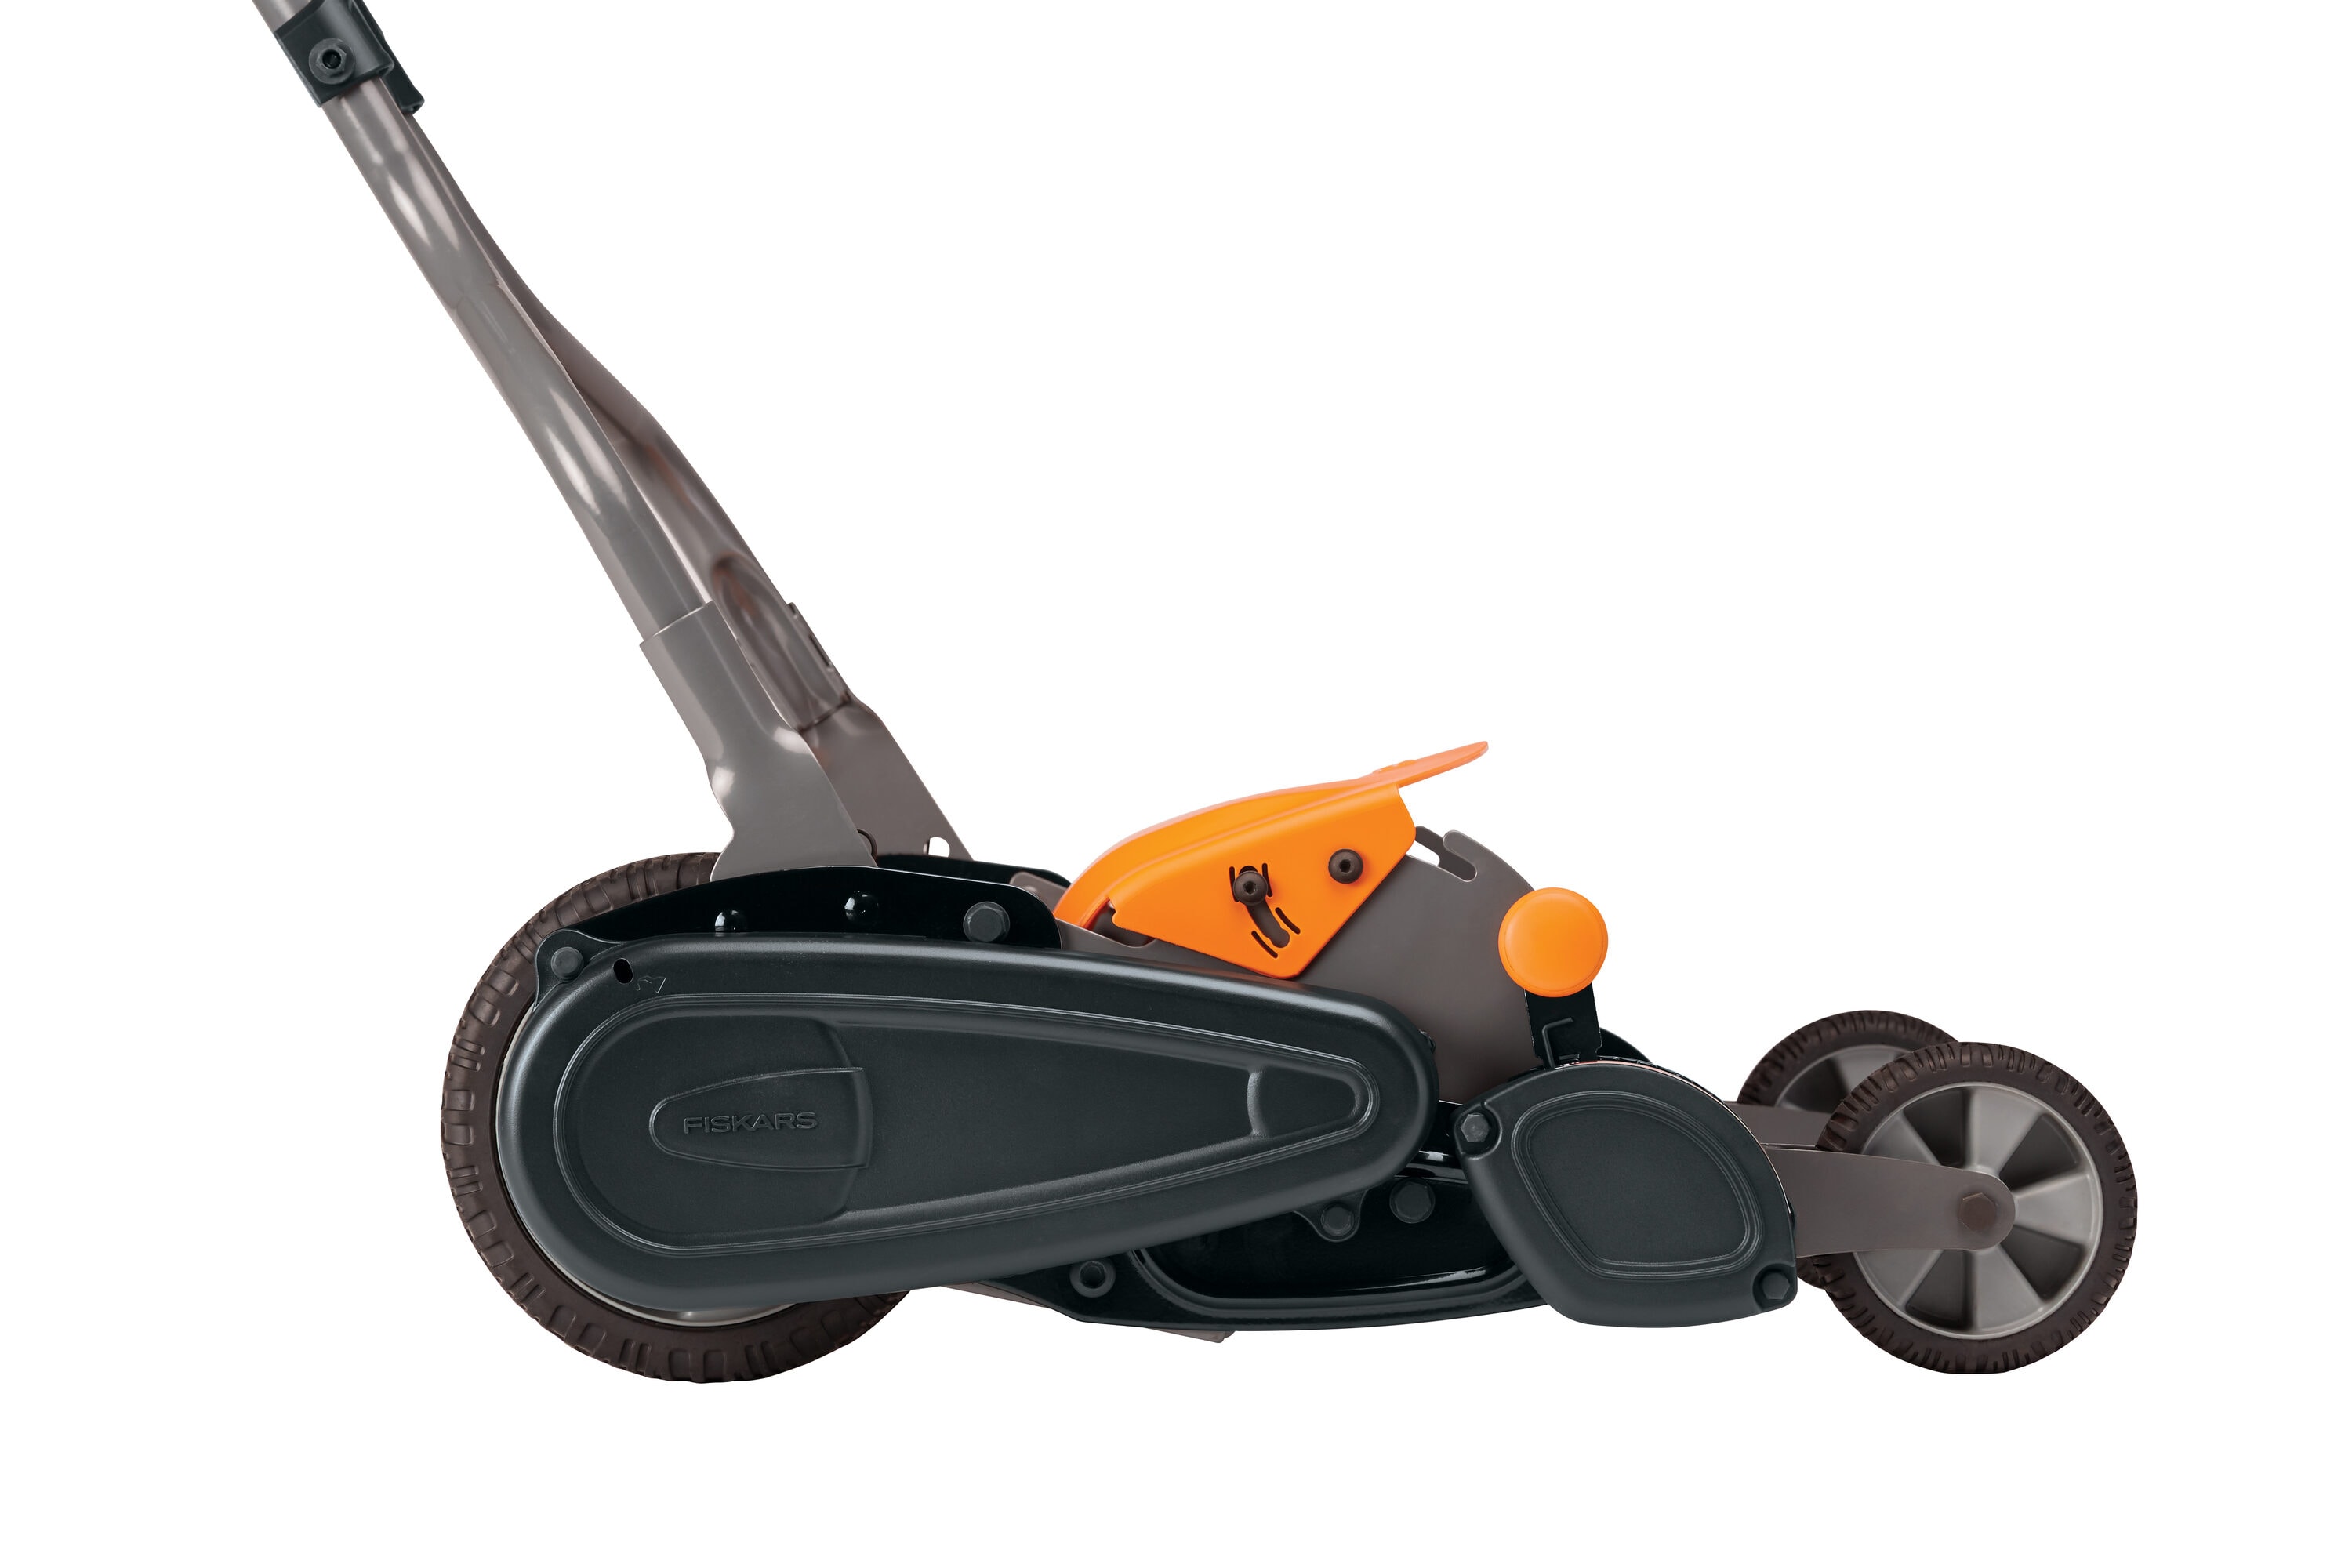 Earthwise Cordless Electric Reel Lawn Mower, 20V, 16-Inch Cut